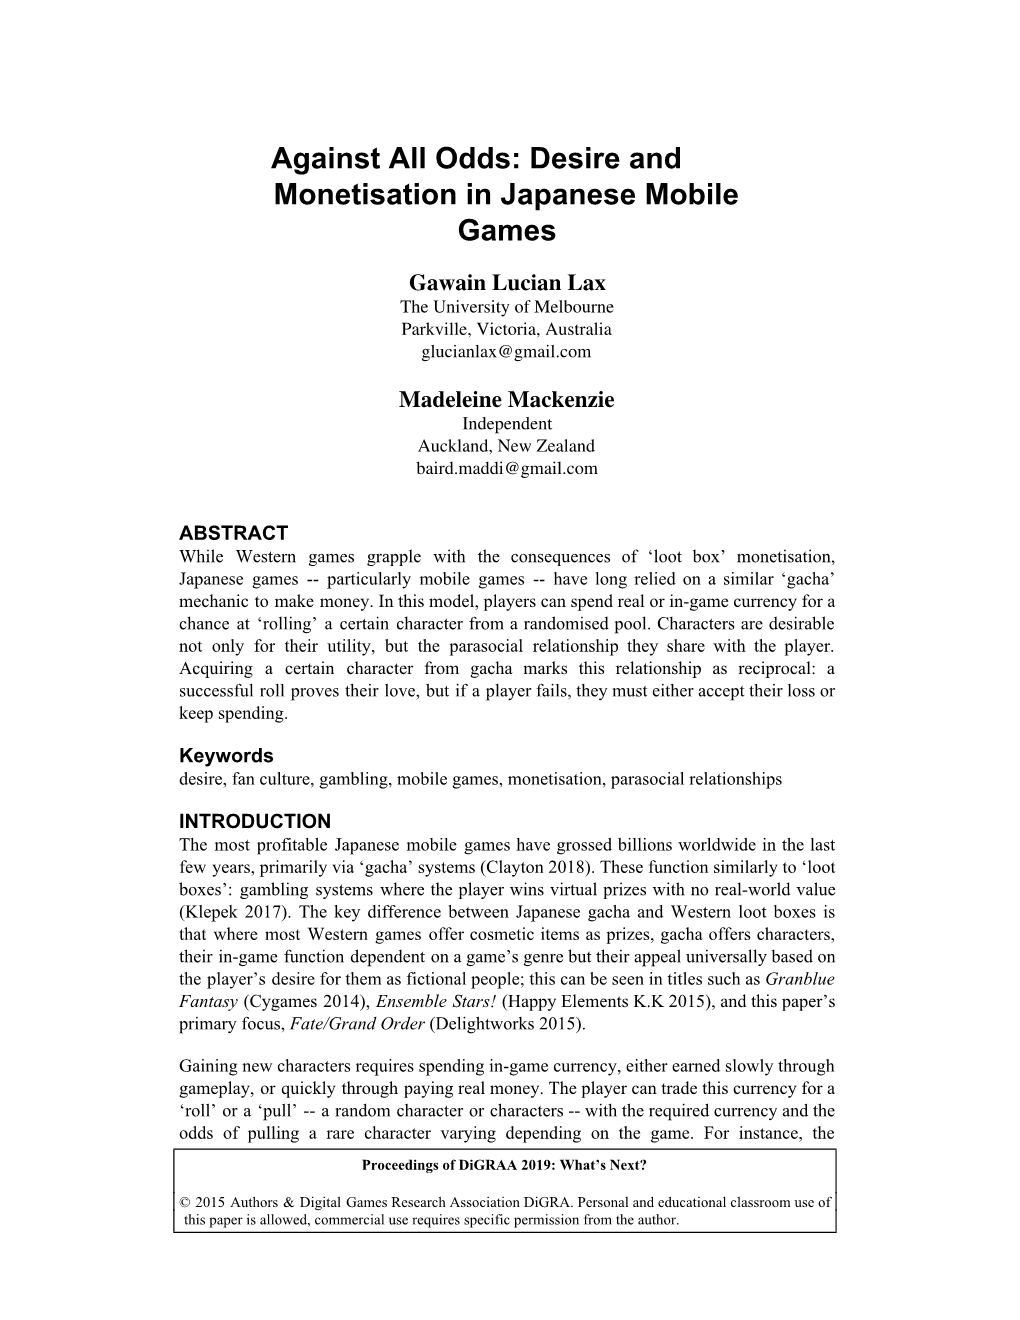 Desire and Monetisation in Japanese Mobile Games